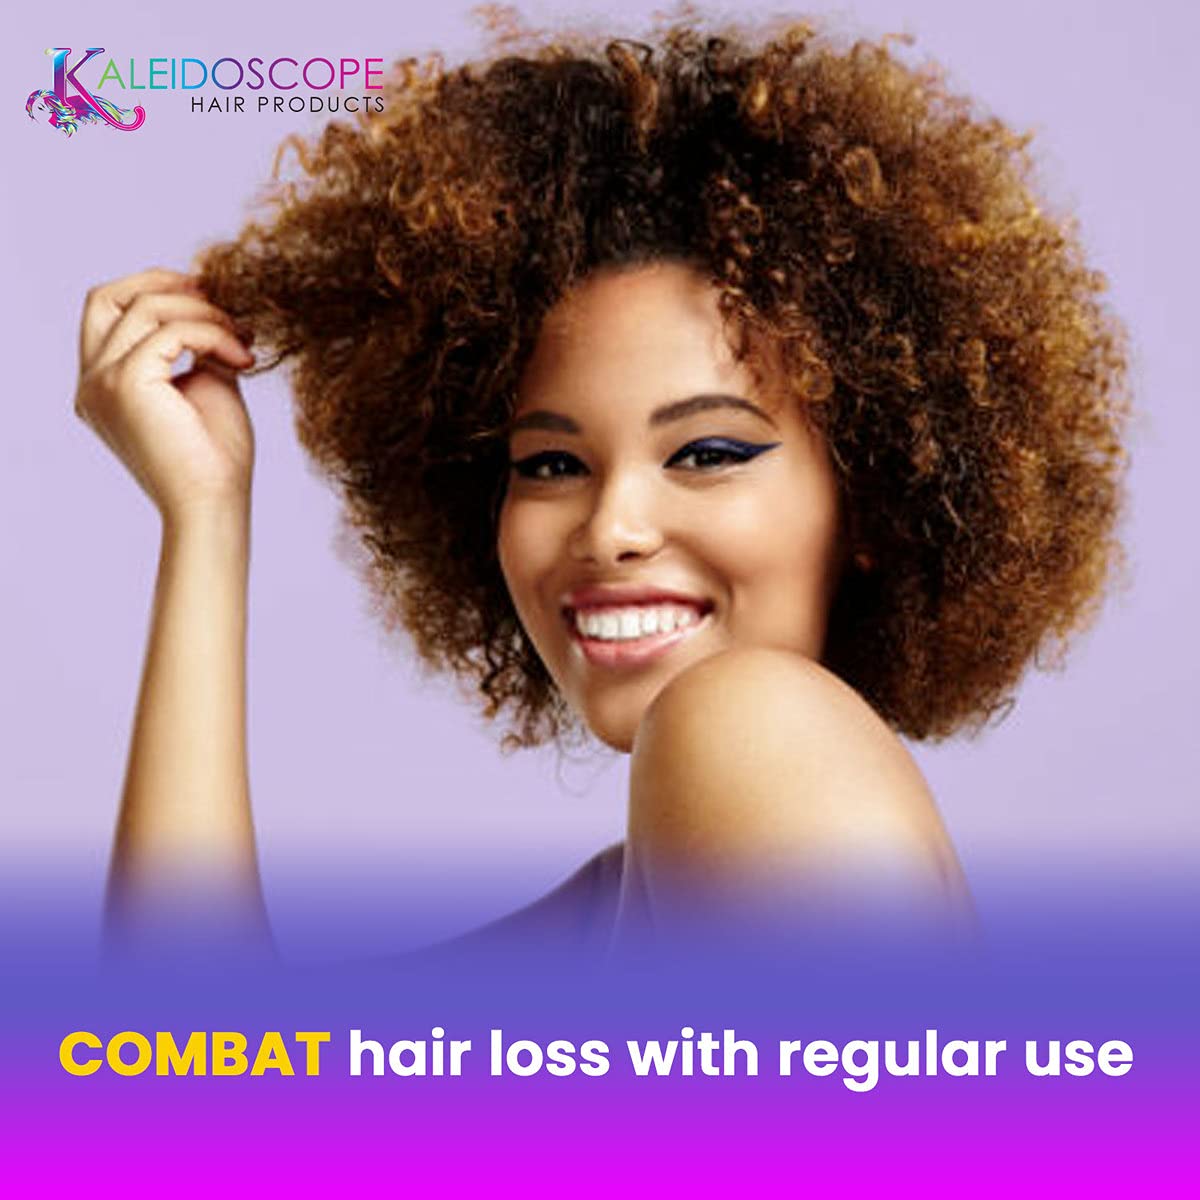 Kaleidoscope Miracle Drops Hair Growth Oil – Fast Hair Growth Serum 2 Oz Find Your New Look Today!